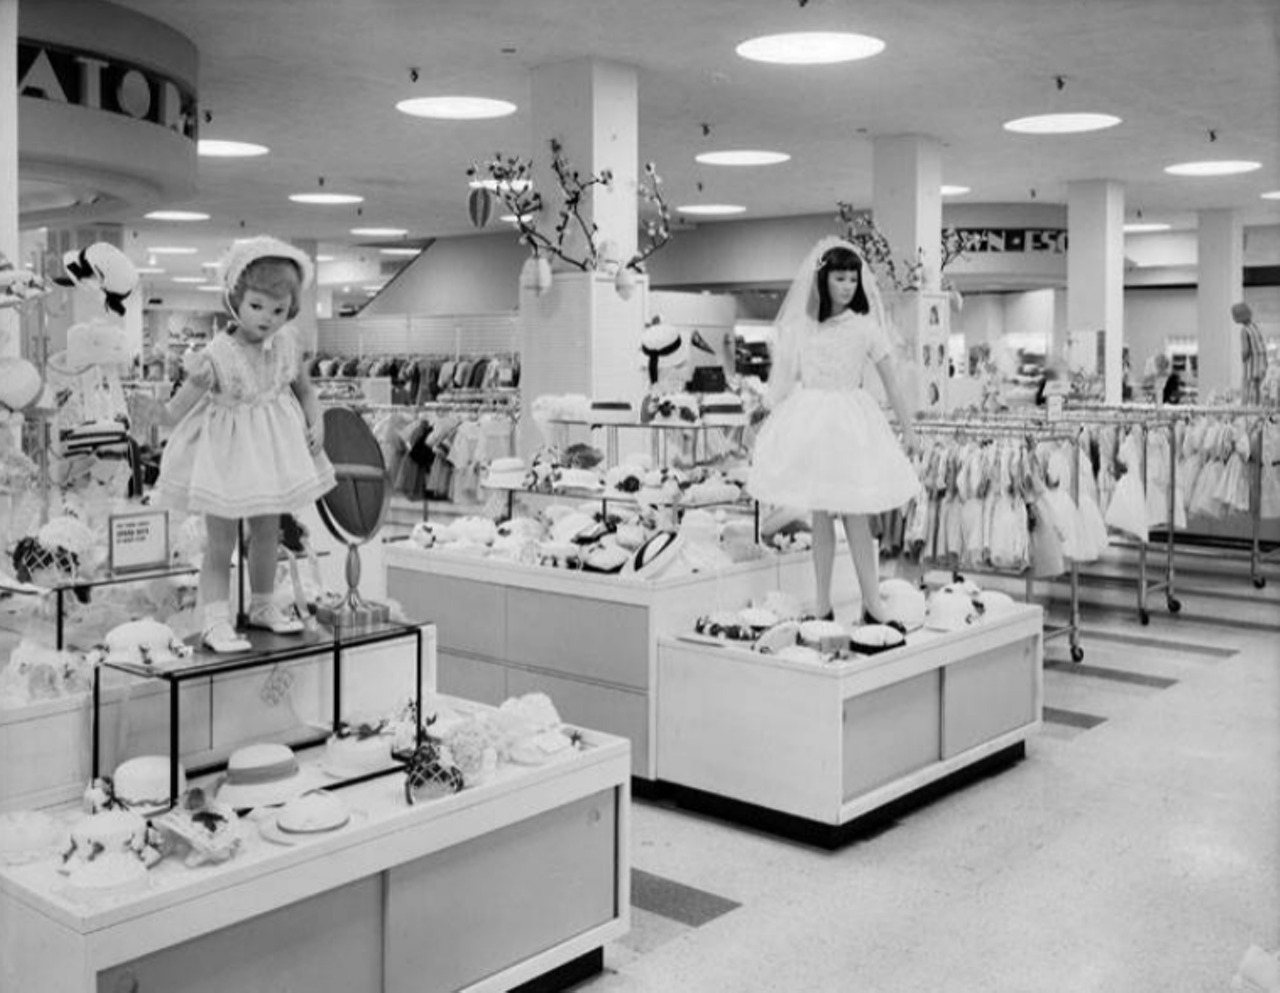 Little girls became little princesses thanks to the fashions from Joske's.